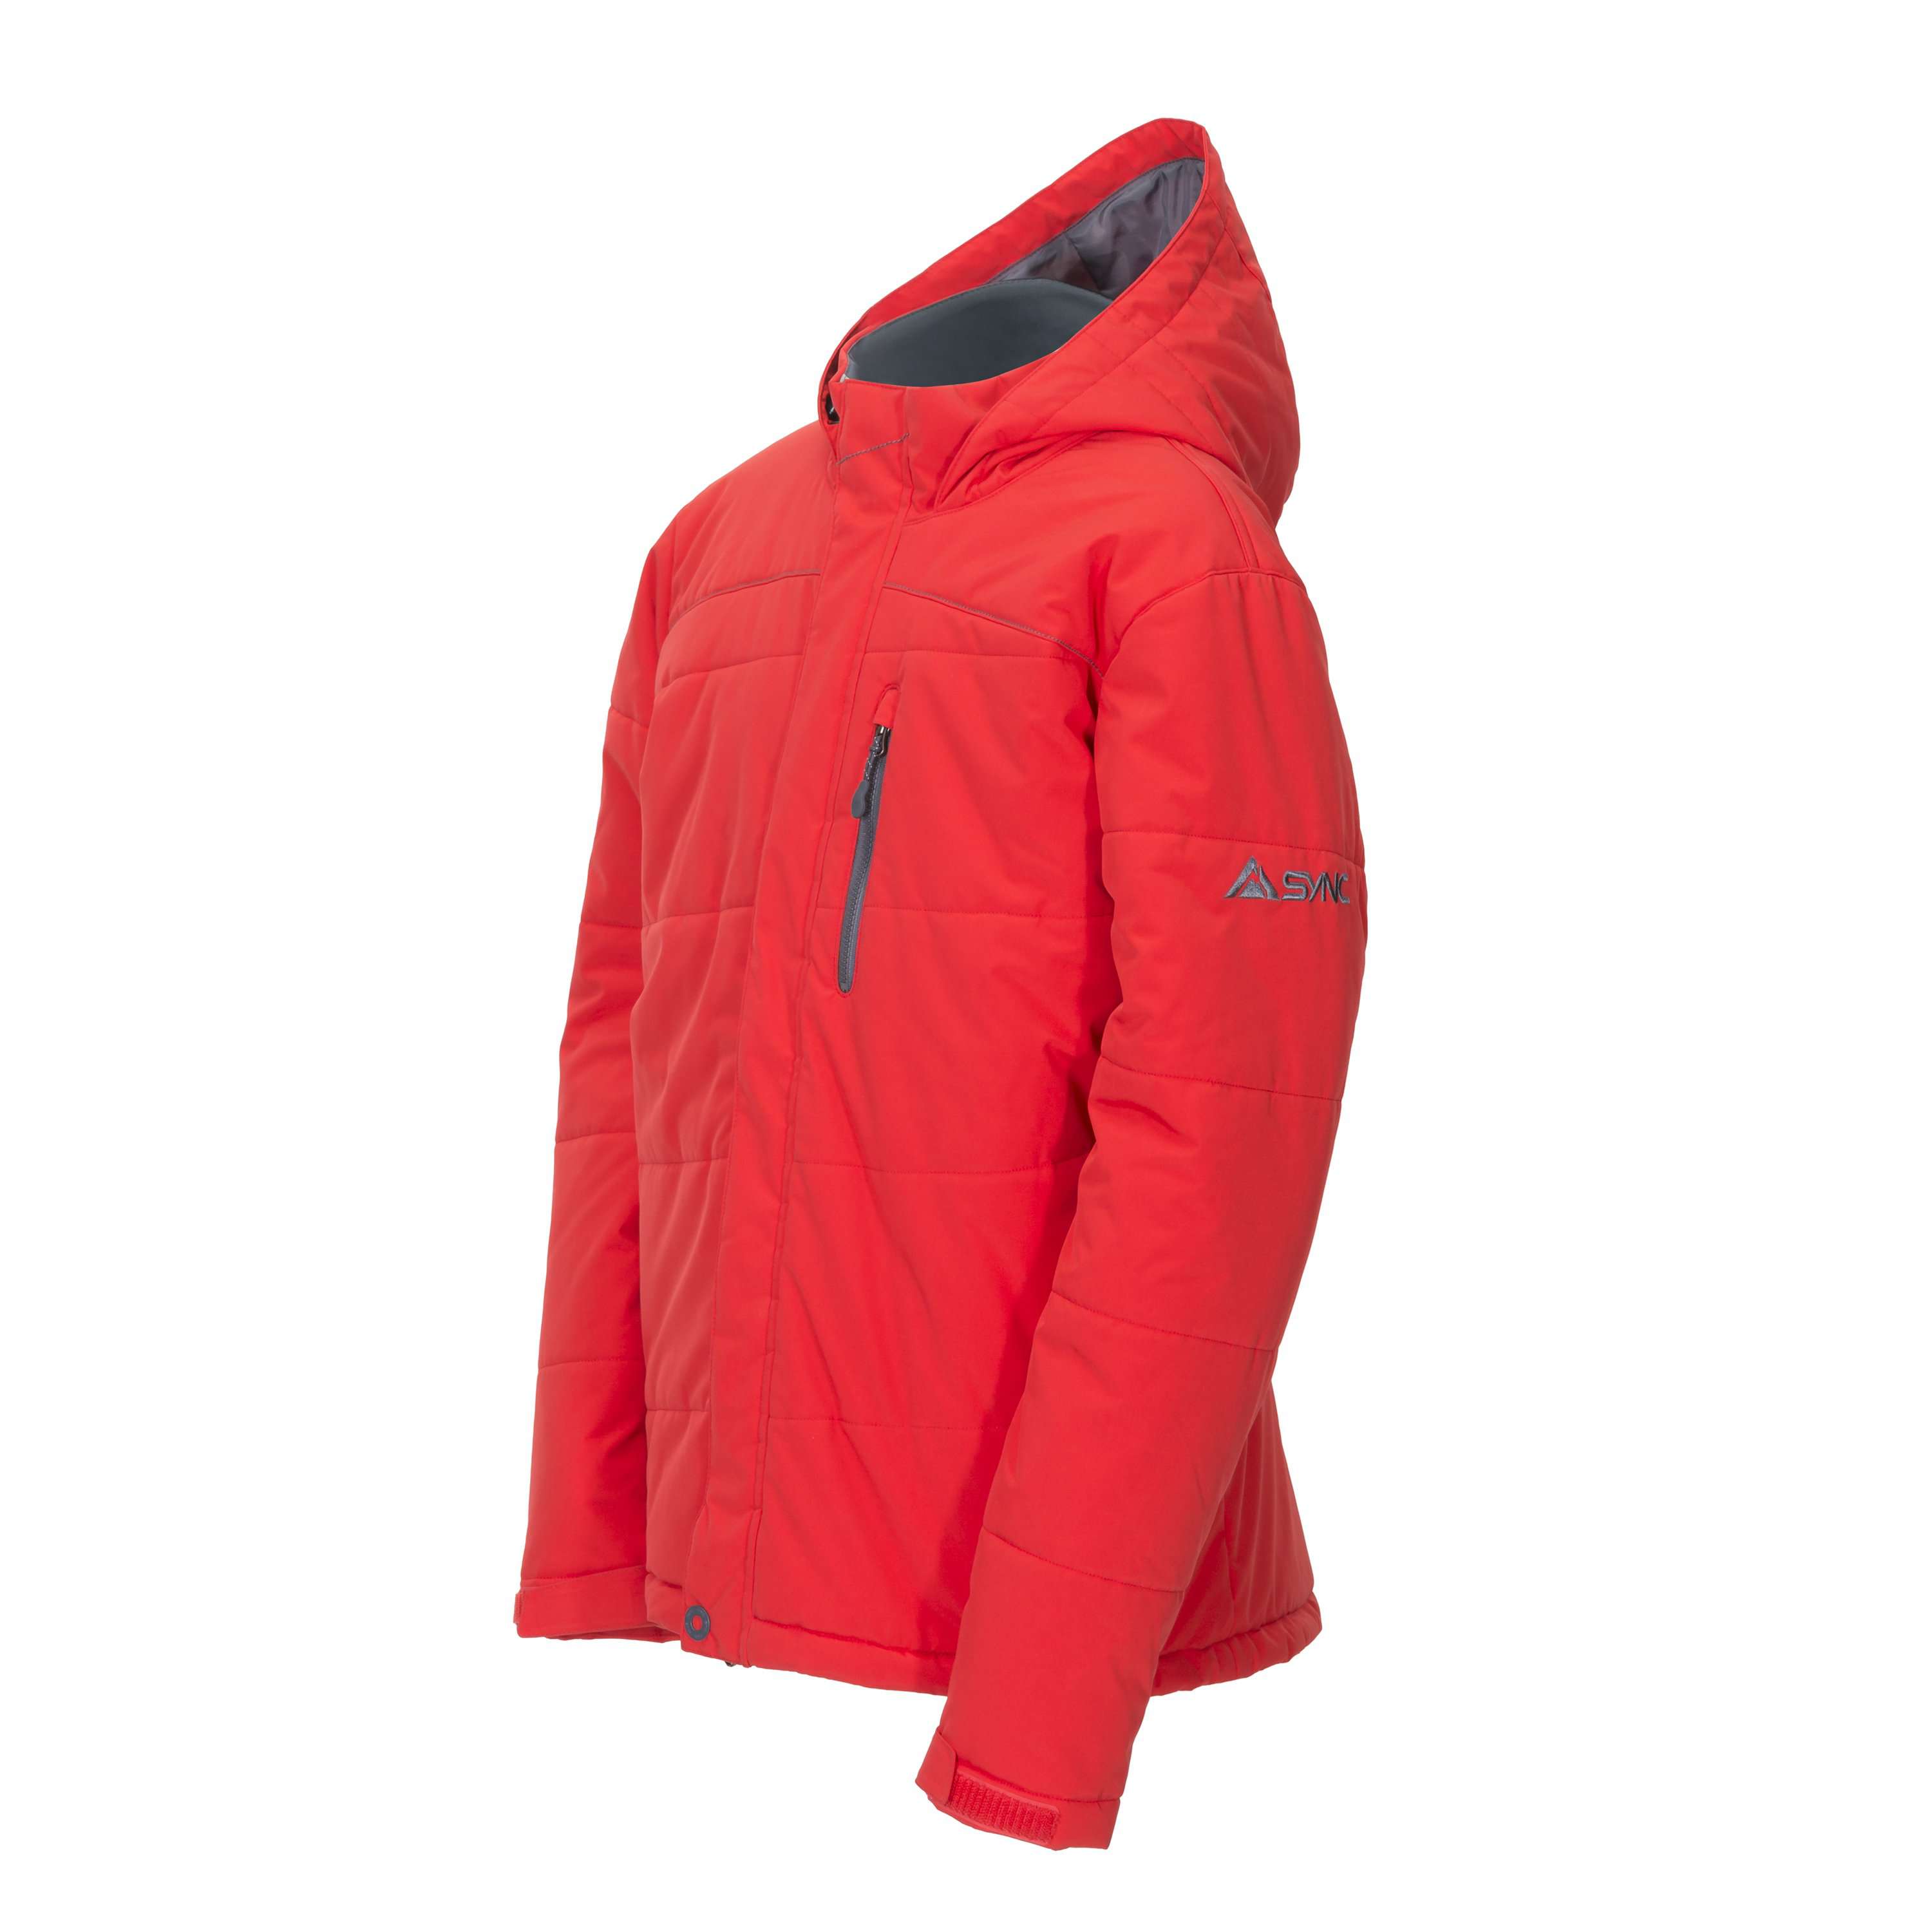 sync-performance-kids-insulated-junior-blaster-red-side